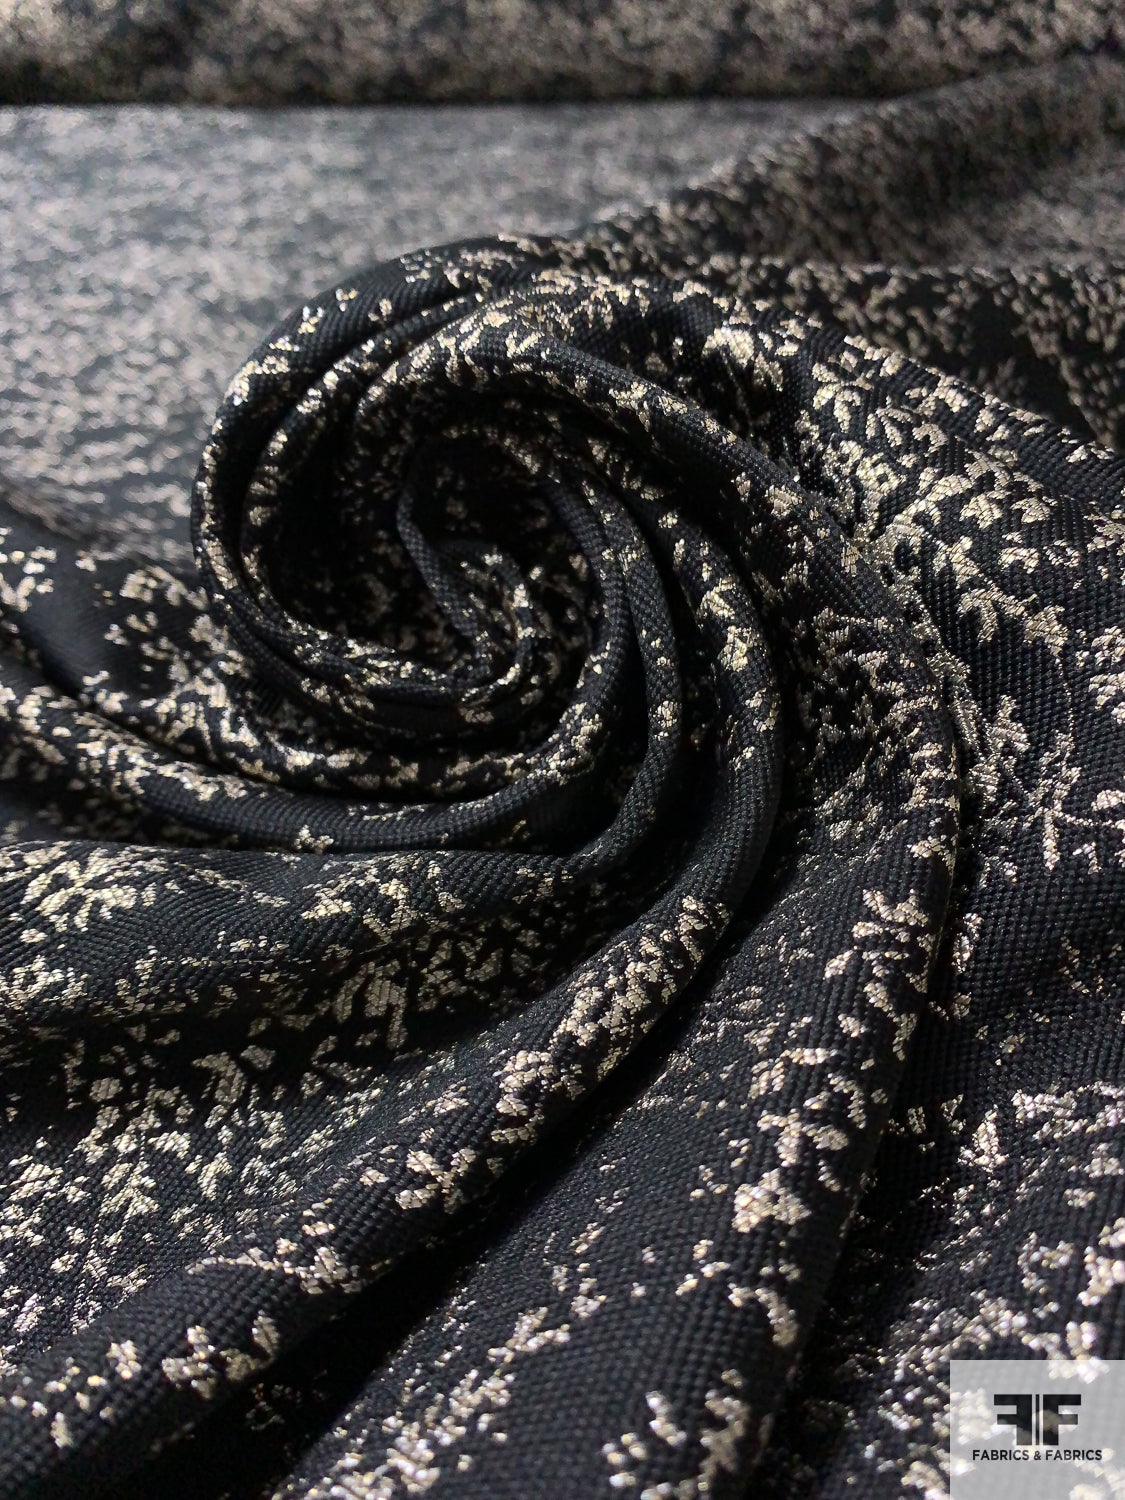 Italian Ruffo Coli and Pamella Roland Disty Leaf Metallic Brocade with Fused-Back - Black / Silvery-Gold